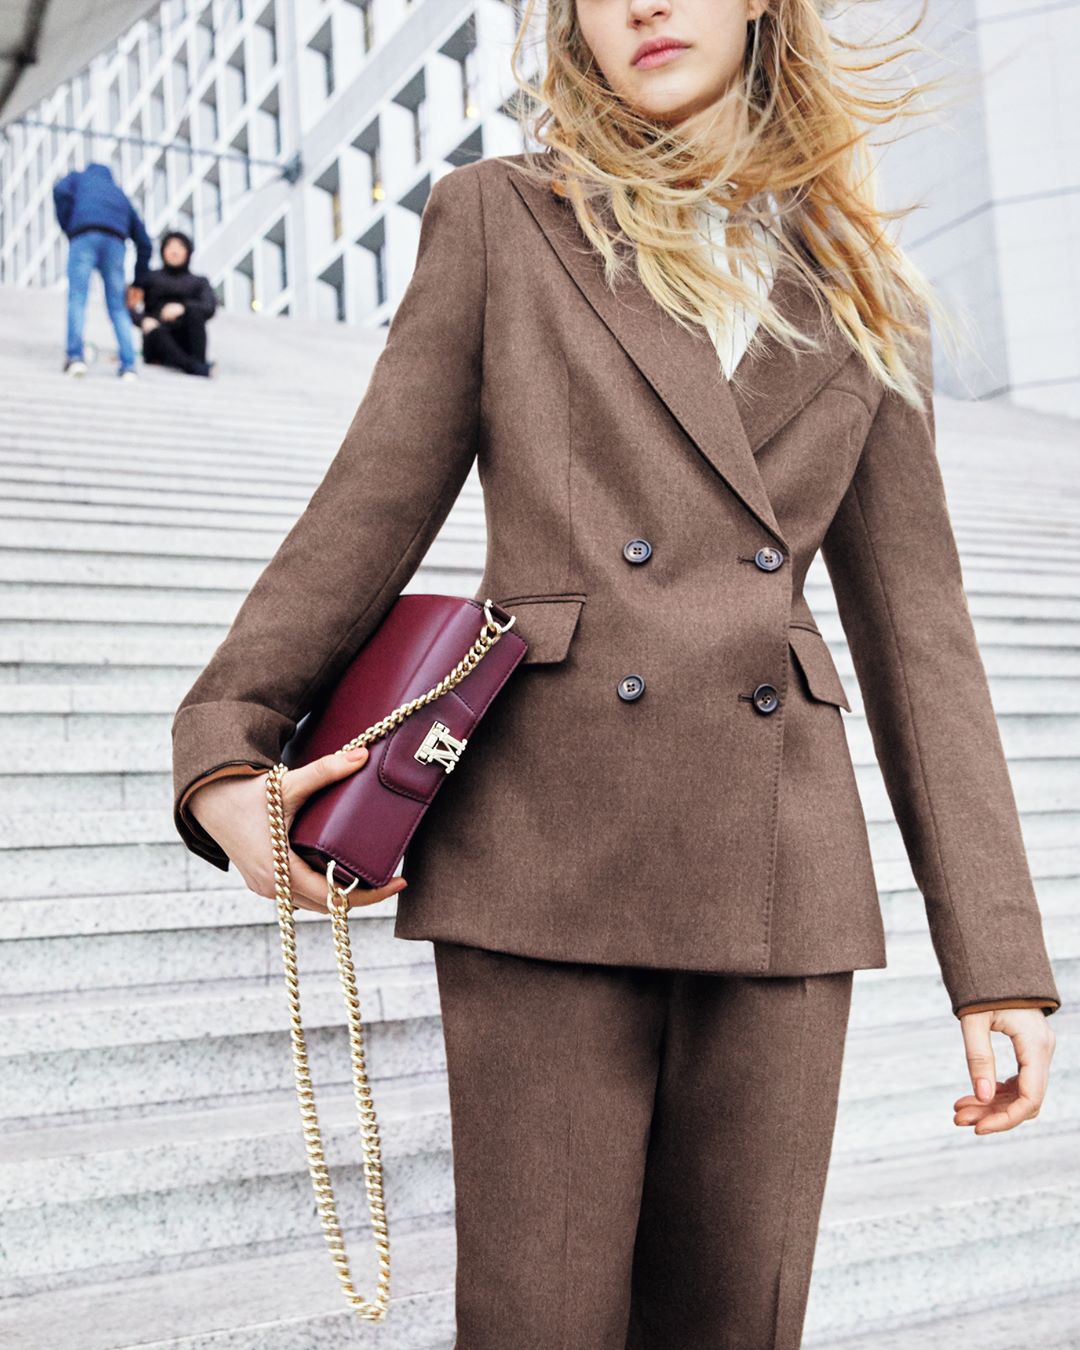 Max Mara - New arrivals. #MaxMara updates this double breasted suit with the #MaxMaraFW20 satin and suede clutch with detachable strap and M-shaped monogrammed logo.⁣
⁣
#FW20